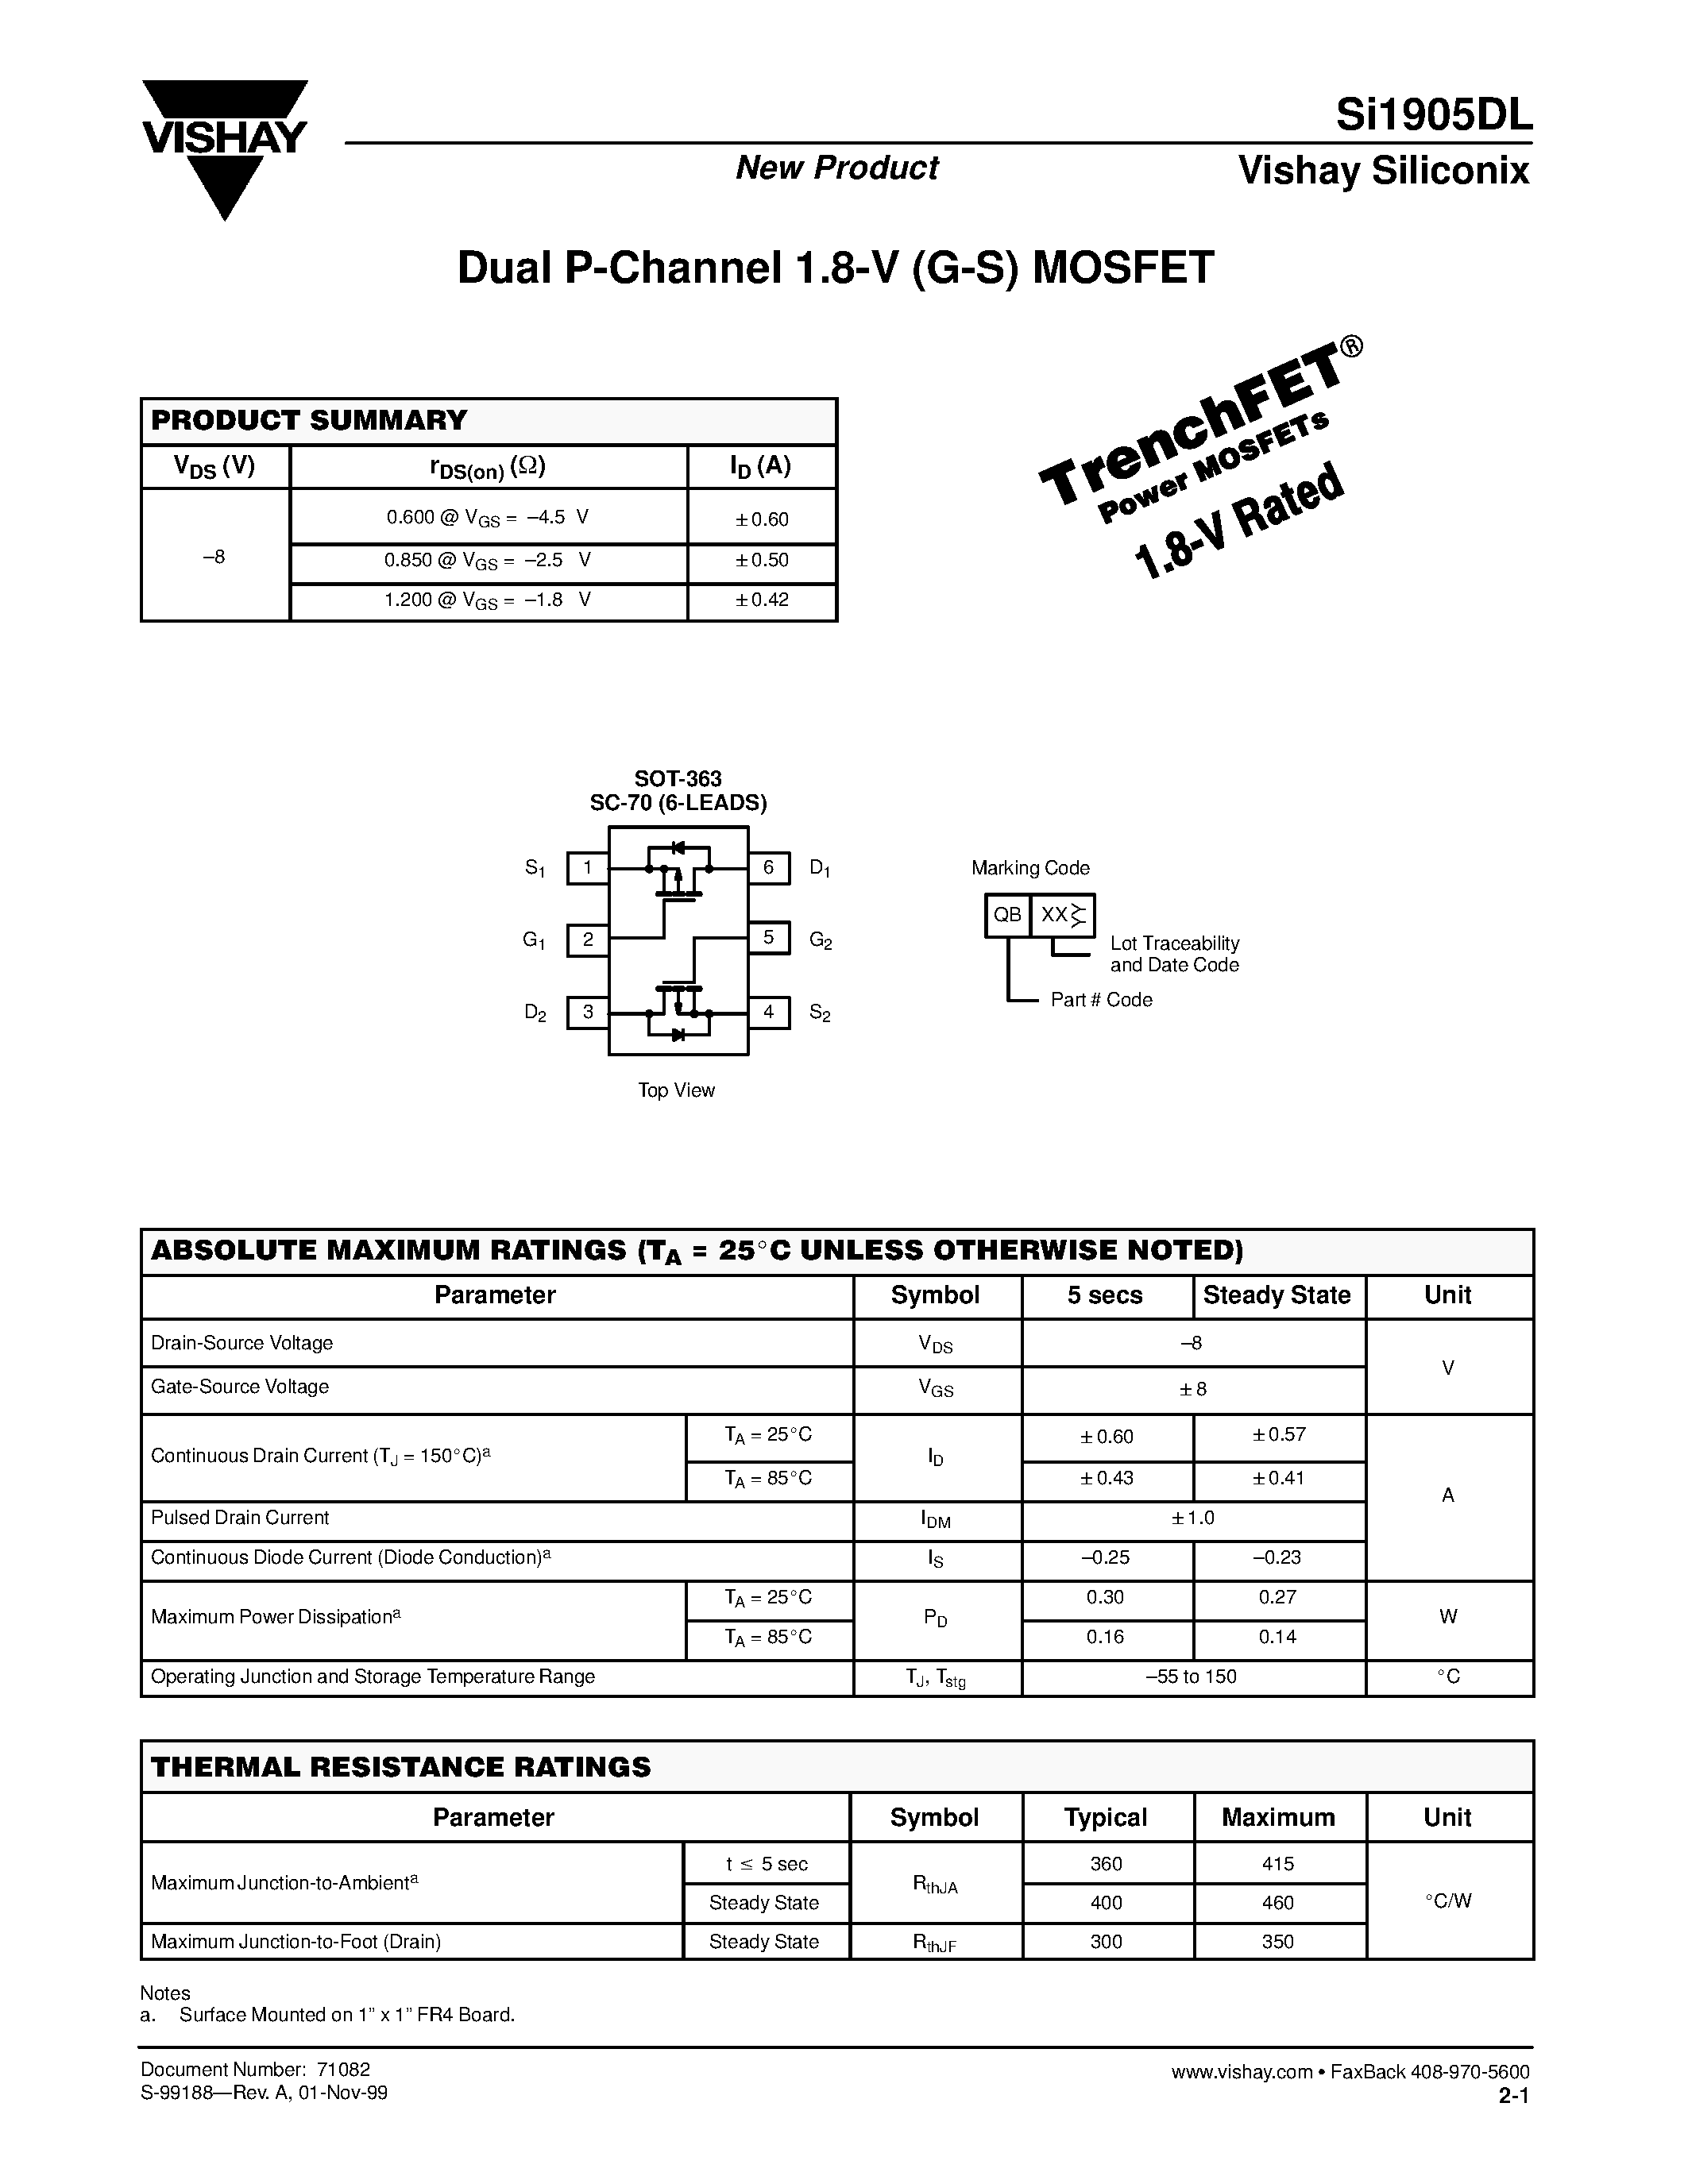 Datasheet SI1905DL - Dual P-Channel 1.8-V (G-S) MOSFET page 1